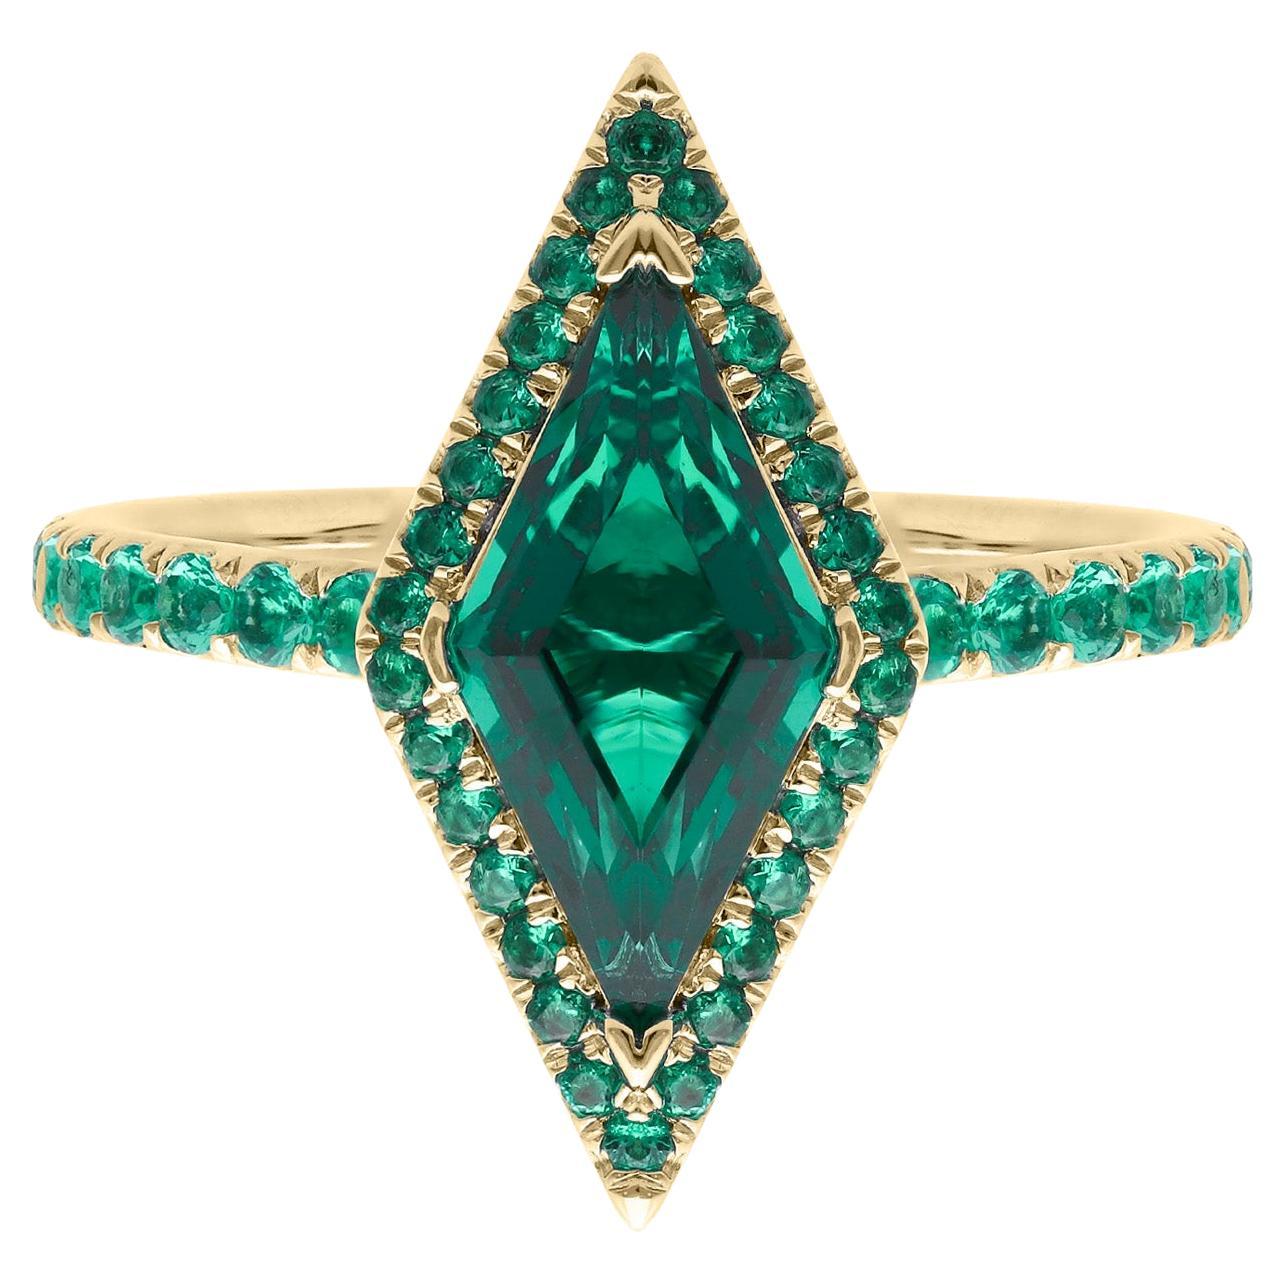 For Sale:  1.50 Carat Emerald Lozenge Ring, Green, Round Emerald Pave, 18kt Yellow Gold